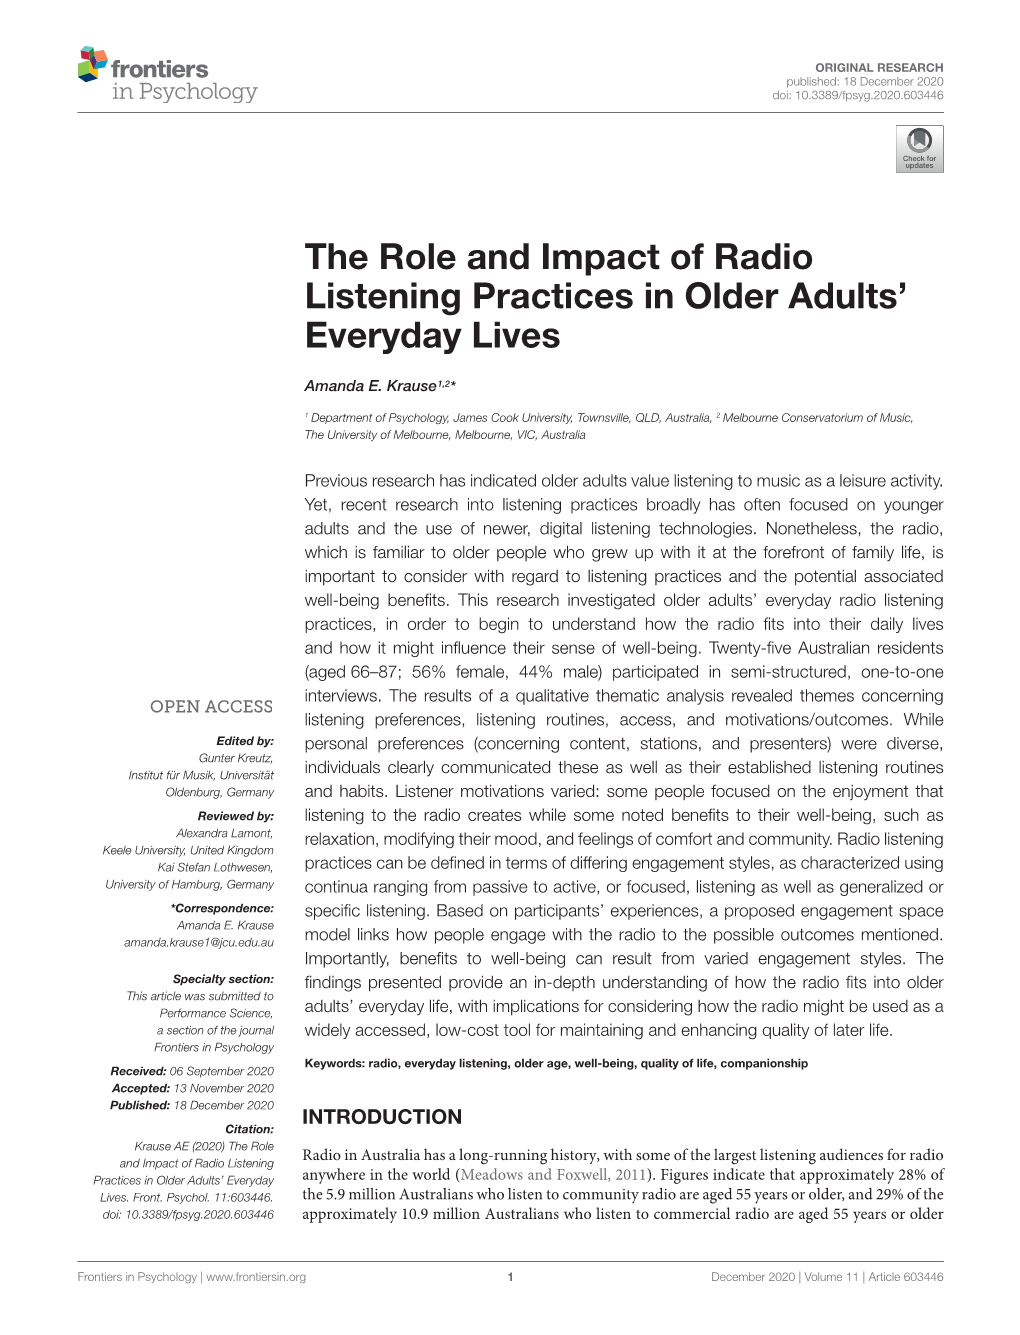 The Role and Impact of Radio Listening Practices in Older Adults’ Everyday Lives